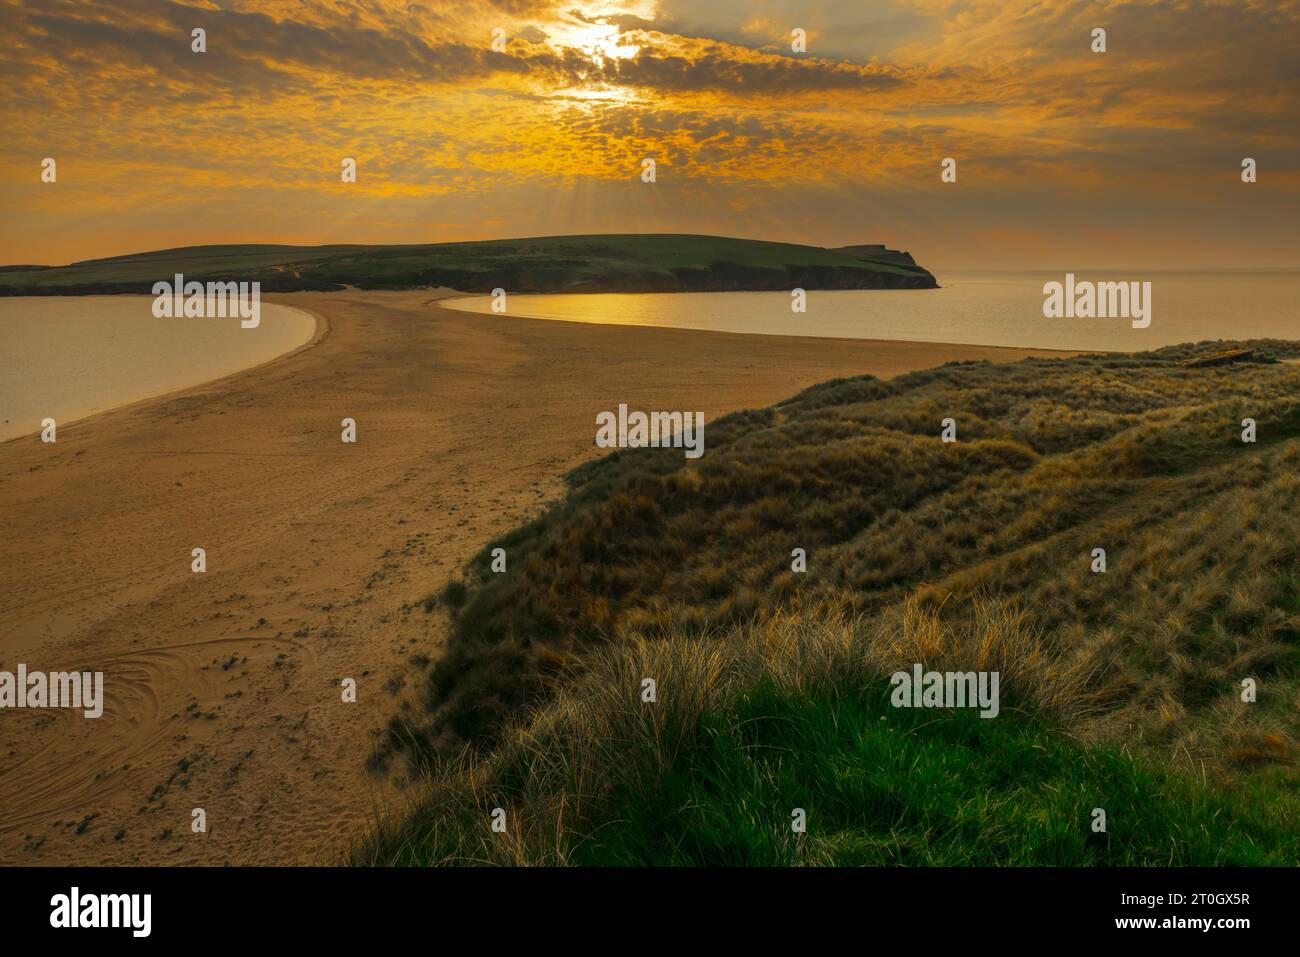 St Ninian's Beach is a large, natural sand causeway with sea on either side. It is located on the west coast of Shetland. Stock Photo